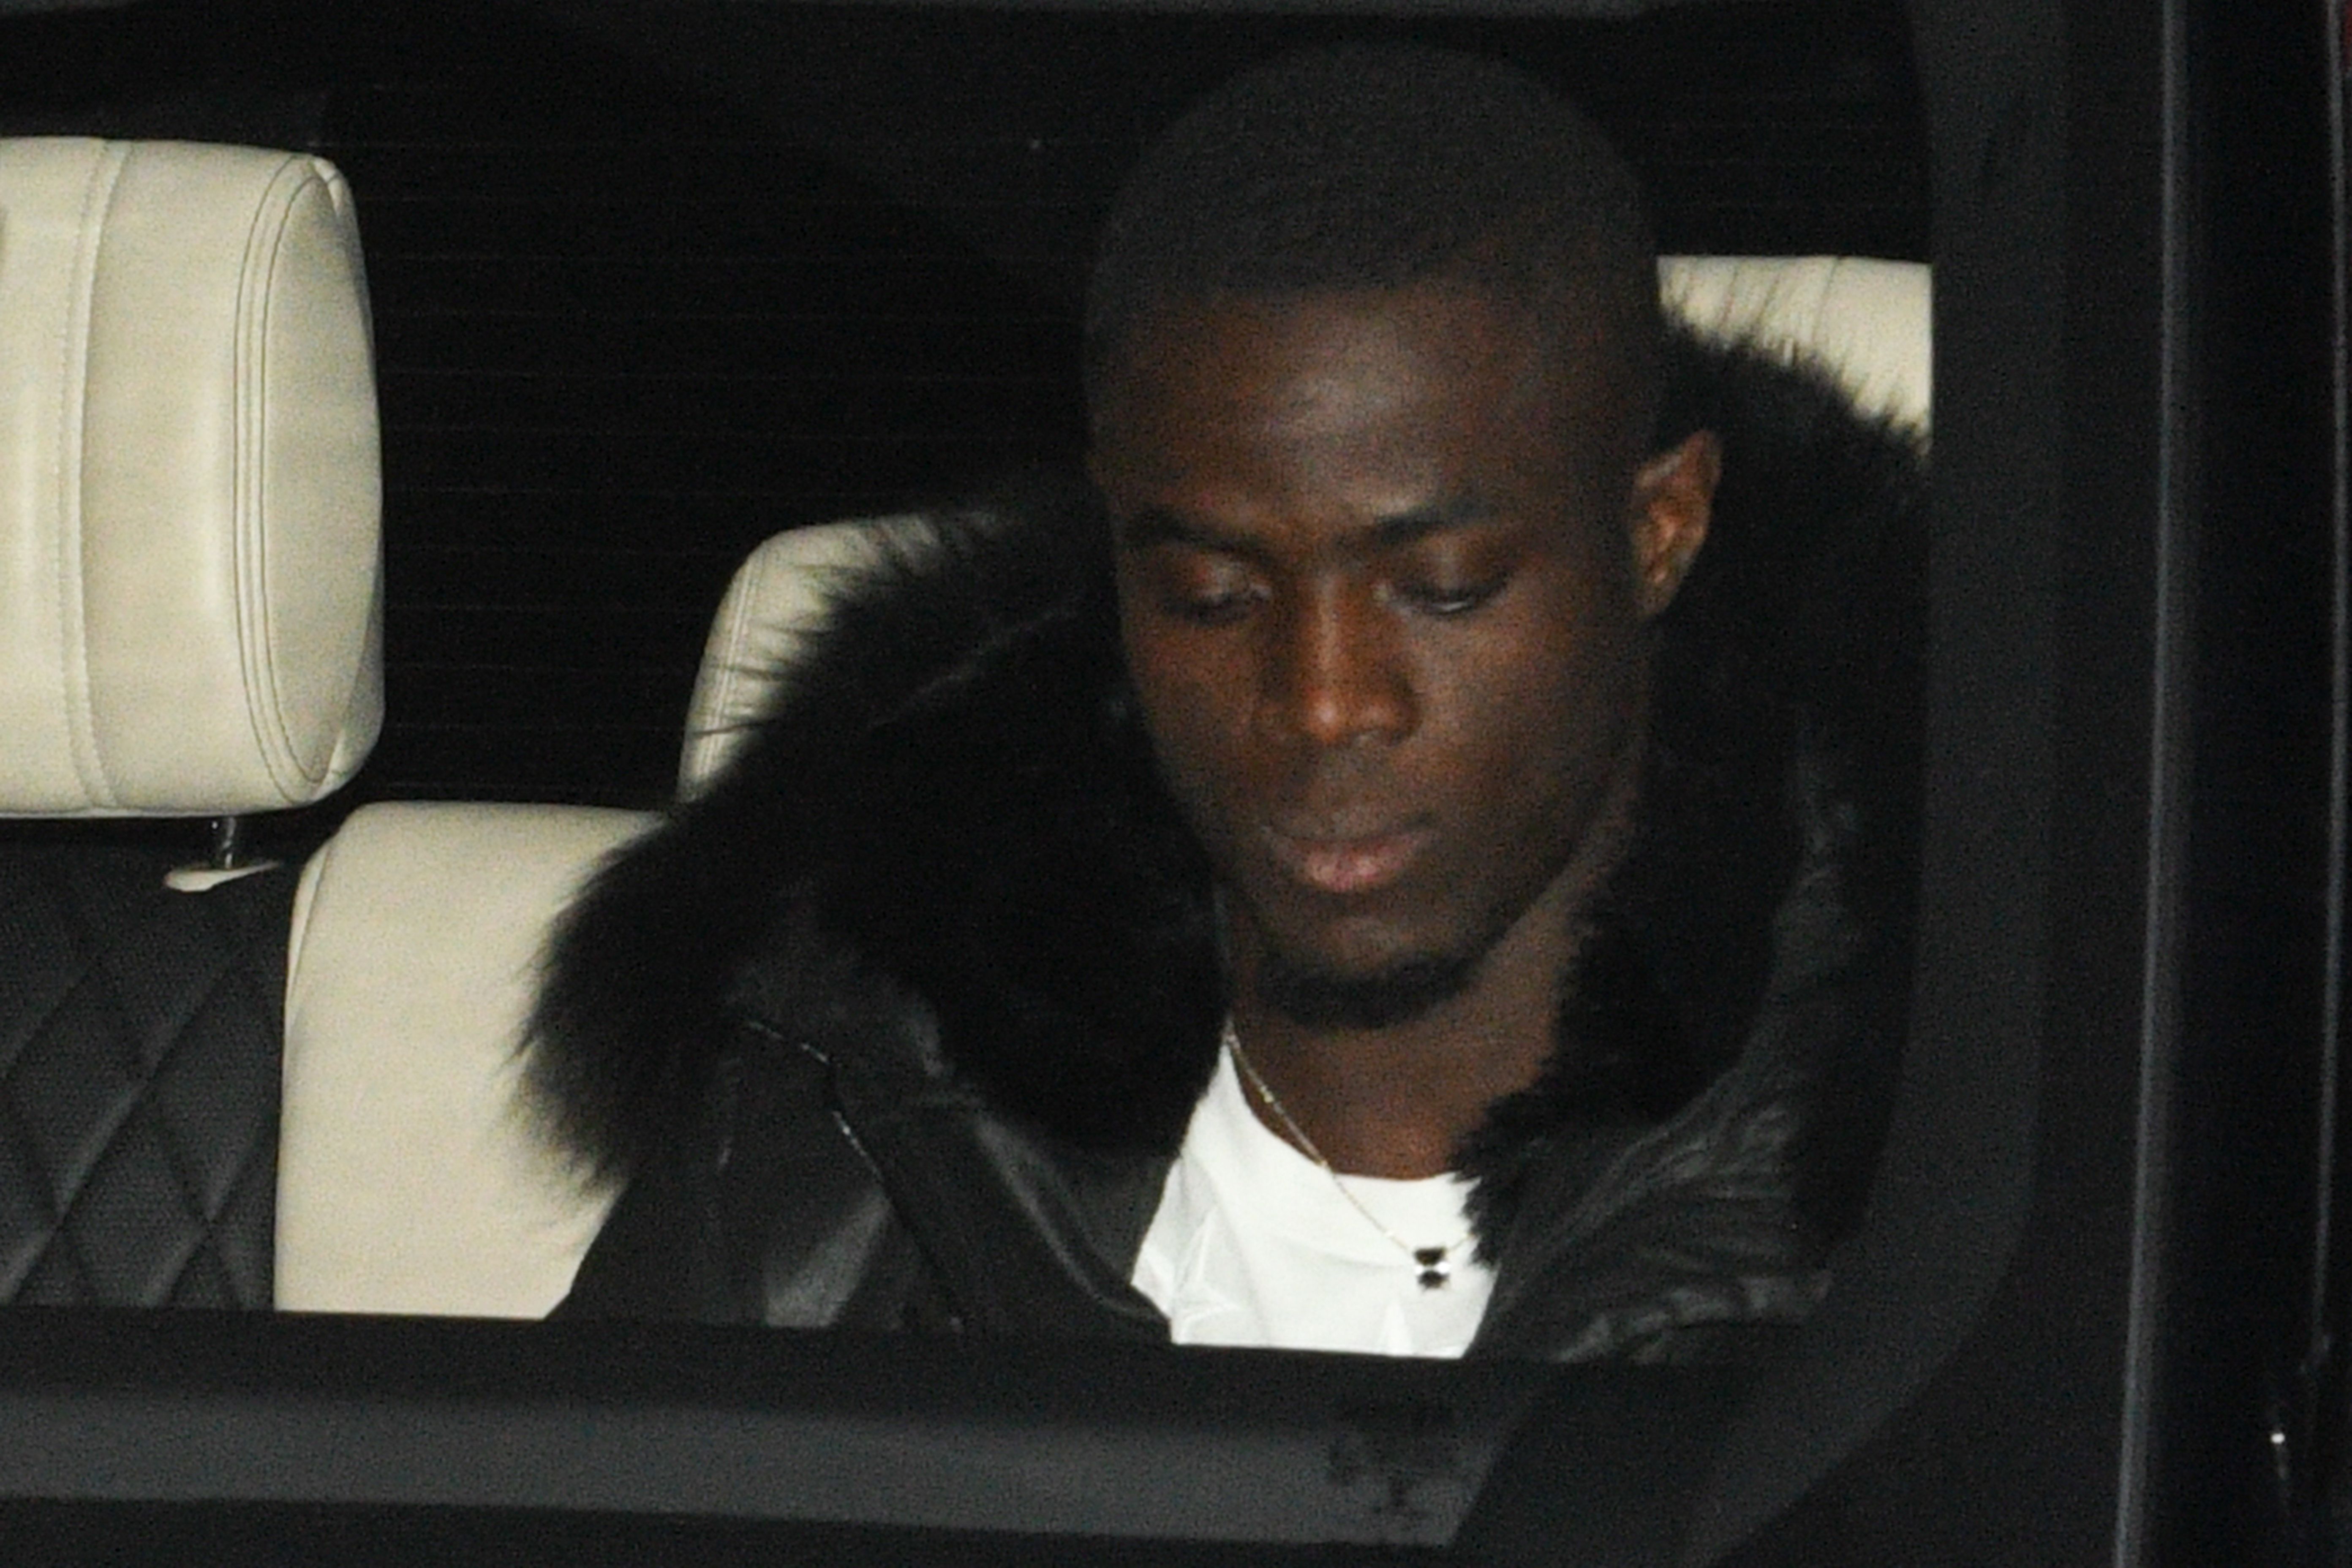 Manchester United's Ivorian defender Eric Bailly leaves the club's Carrington Training complex in Manchester, north west England on December 20, 2018. - Ole Gunnar Solskjaer was Wednesday handed the daunting task of saving Manchester United's season after the disastrous final few months of Jose Mourinho's reign. (Photo by Oli SCARFF / AFP)        (Photo credit should read OLI SCARFF/AFP/Getty Images)